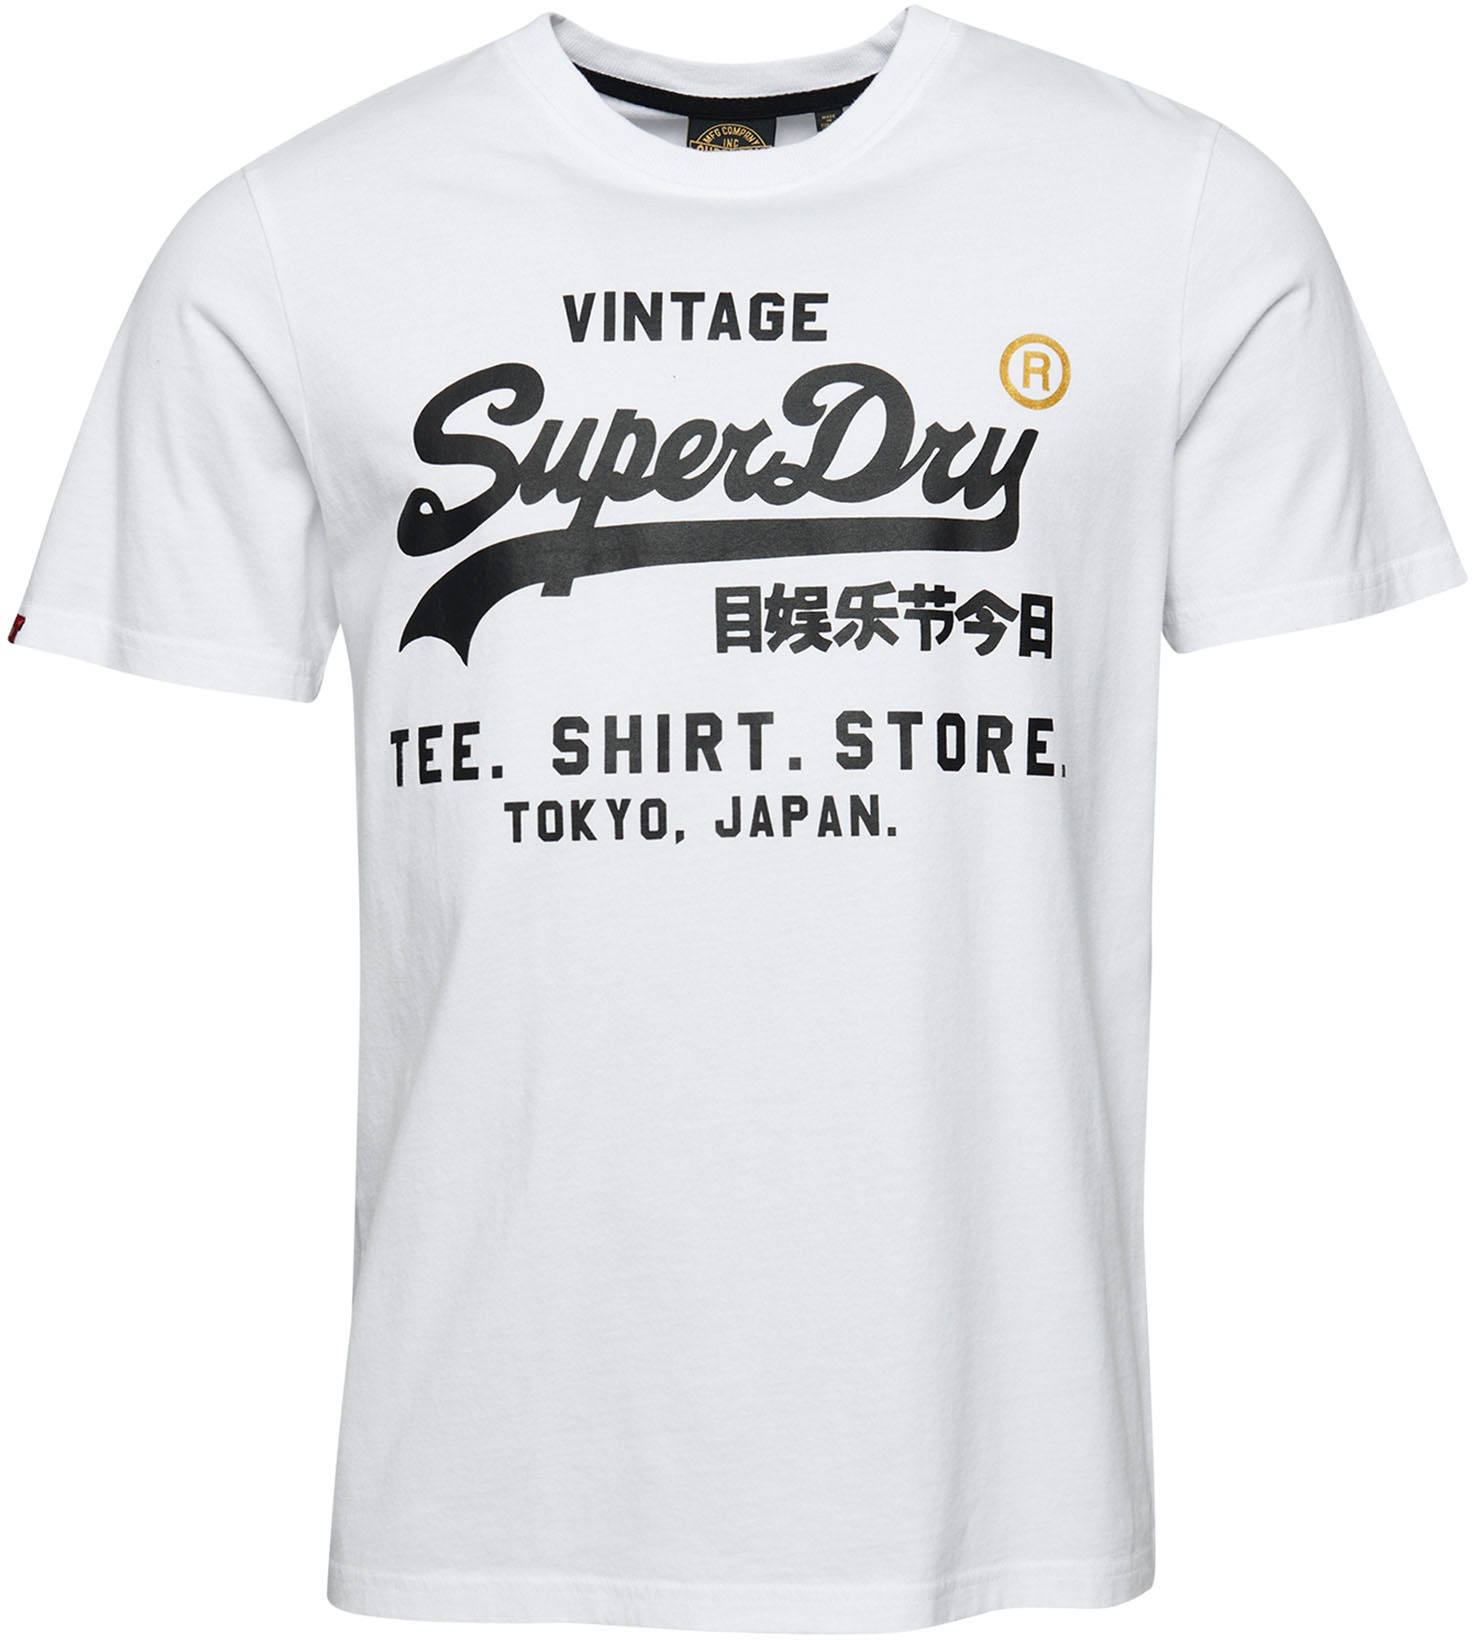 Superdry T-Shirt »VINTAGE STORE VL ♕ CLASSIC bei TEE«